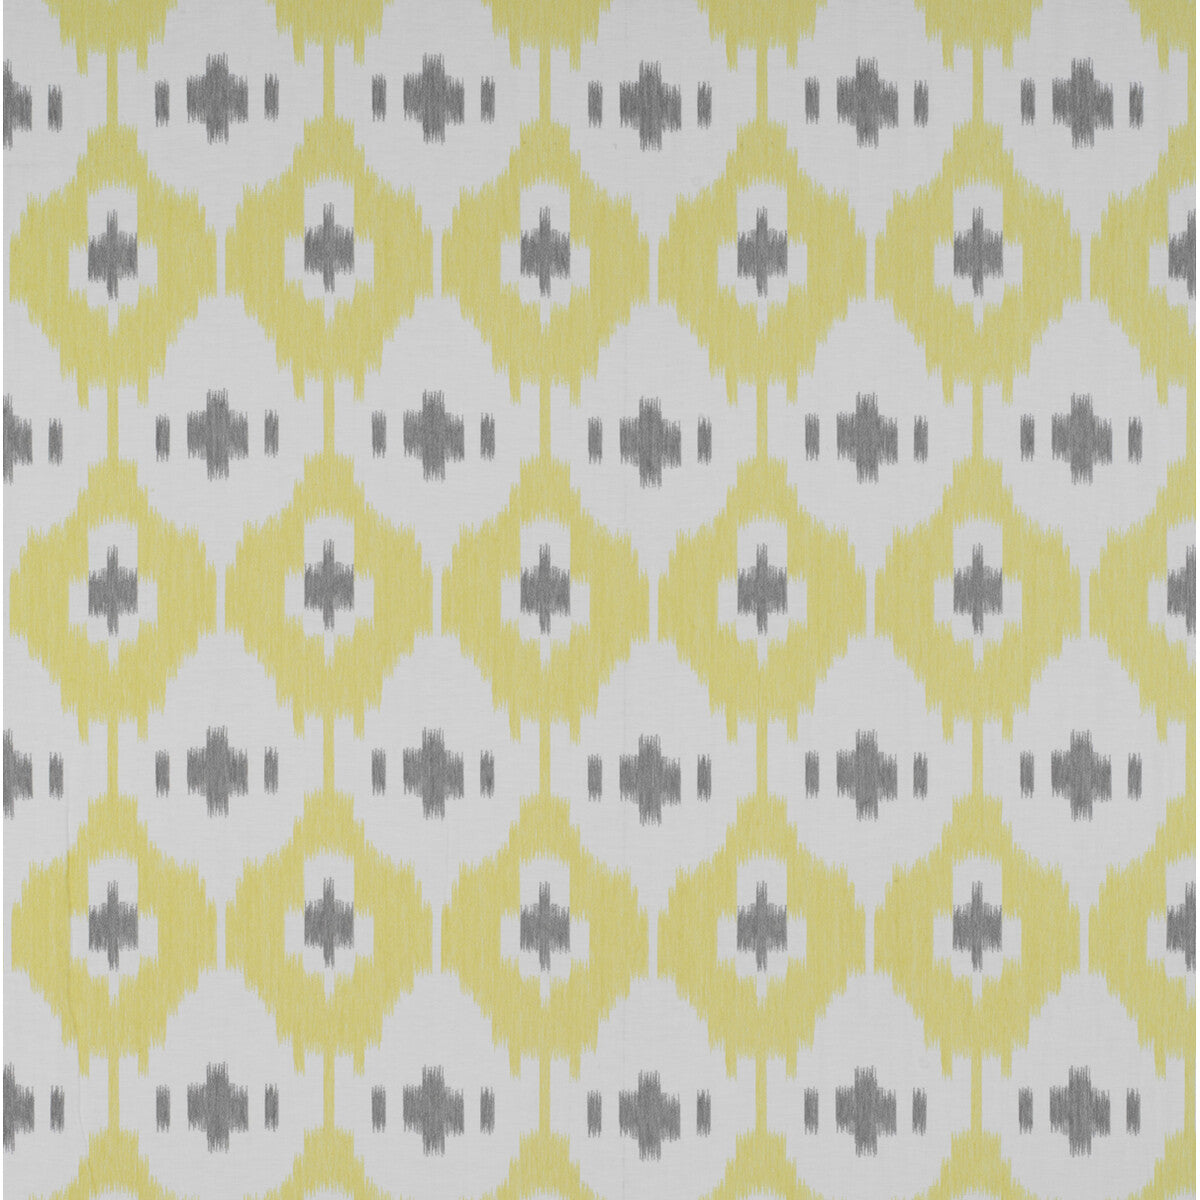 Panarea fabric in amarillo/gris color - pattern GDT5315.008.0 - by Gaston y Daniela in the Tierras collection